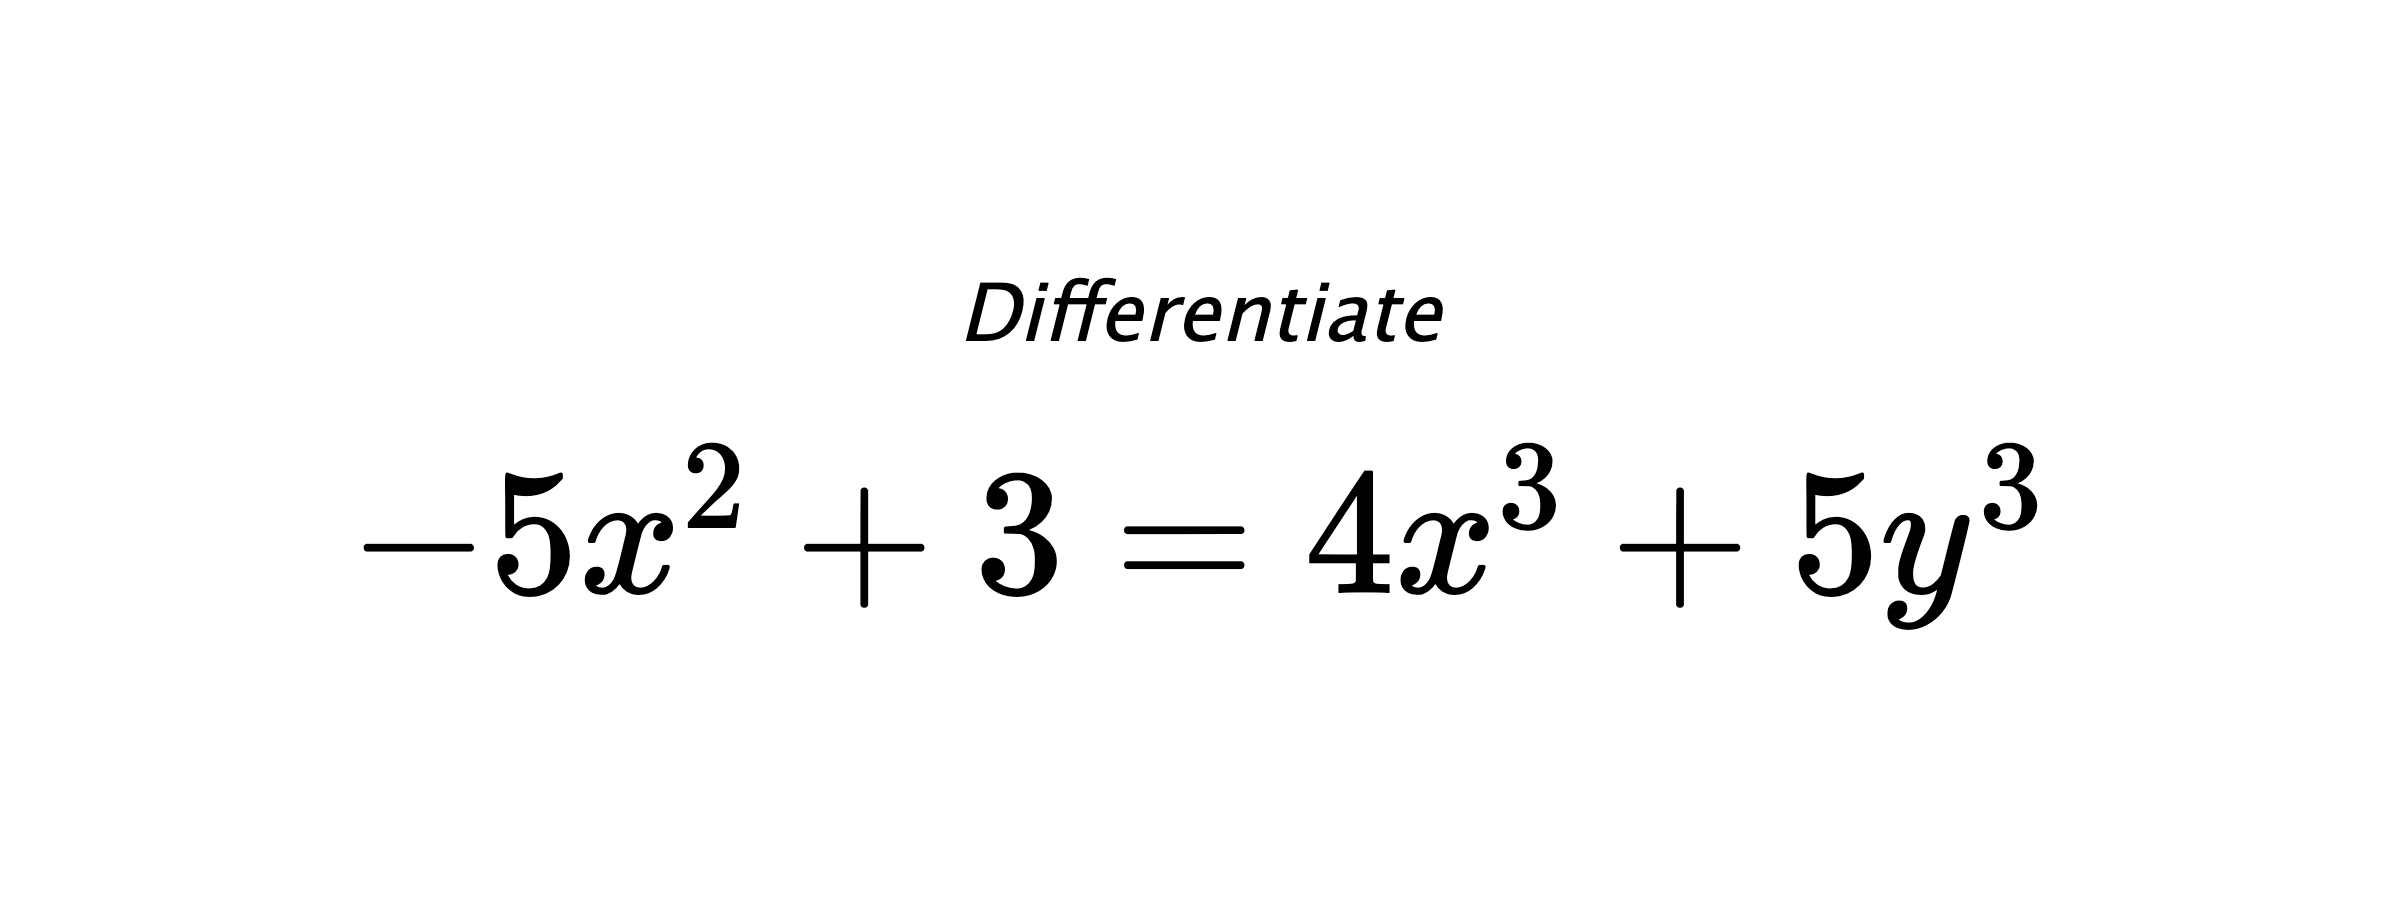 Differentiate $ -5x^2+3 = 4x^3+5y^3 $